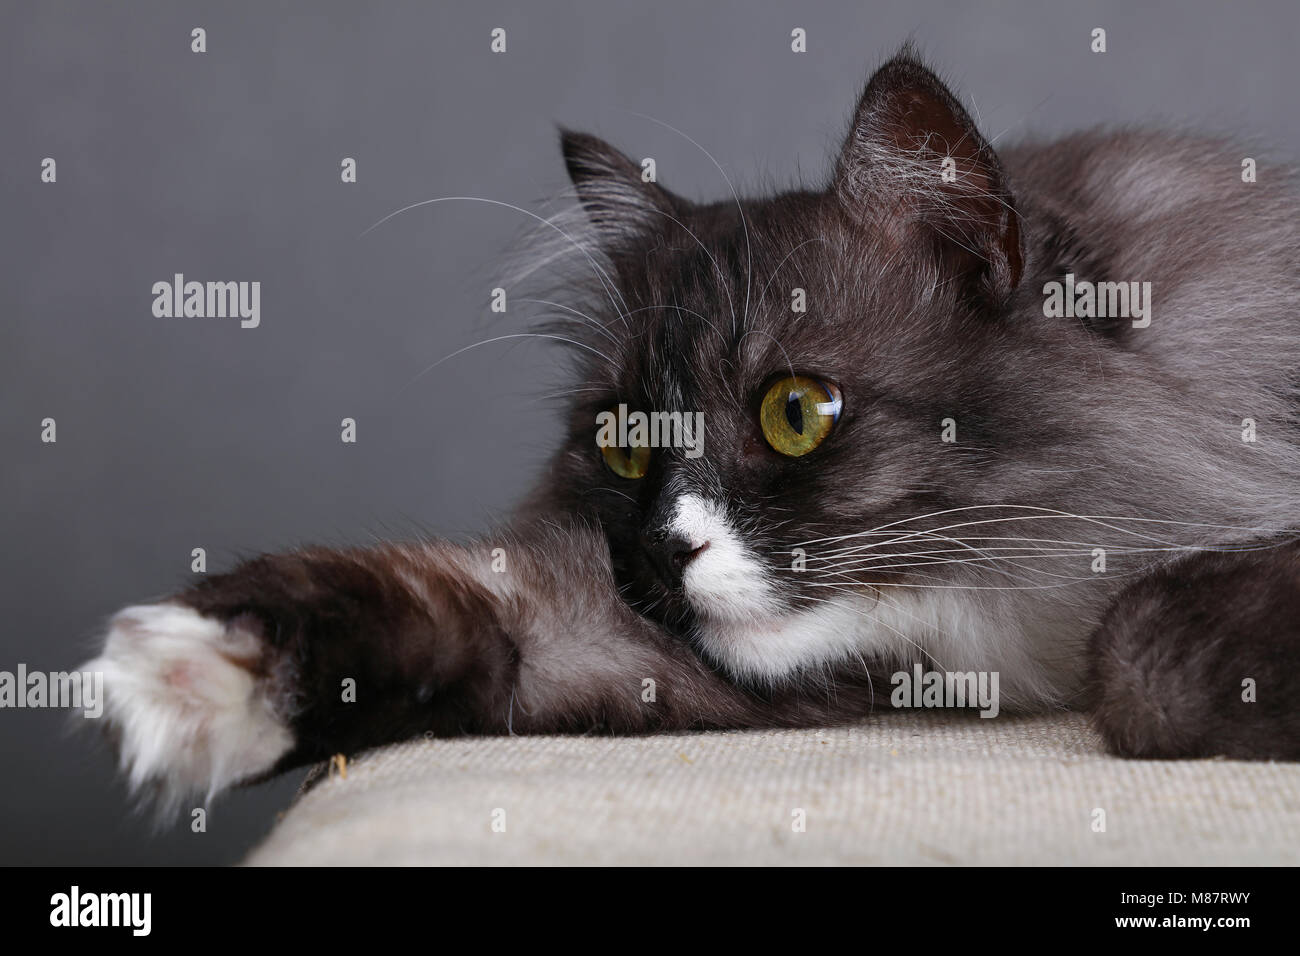 Close up side profile portrait of one cute gray domestic cat with white spots, paws and large whisker, resting and looking away over gray background,  Stock Photo